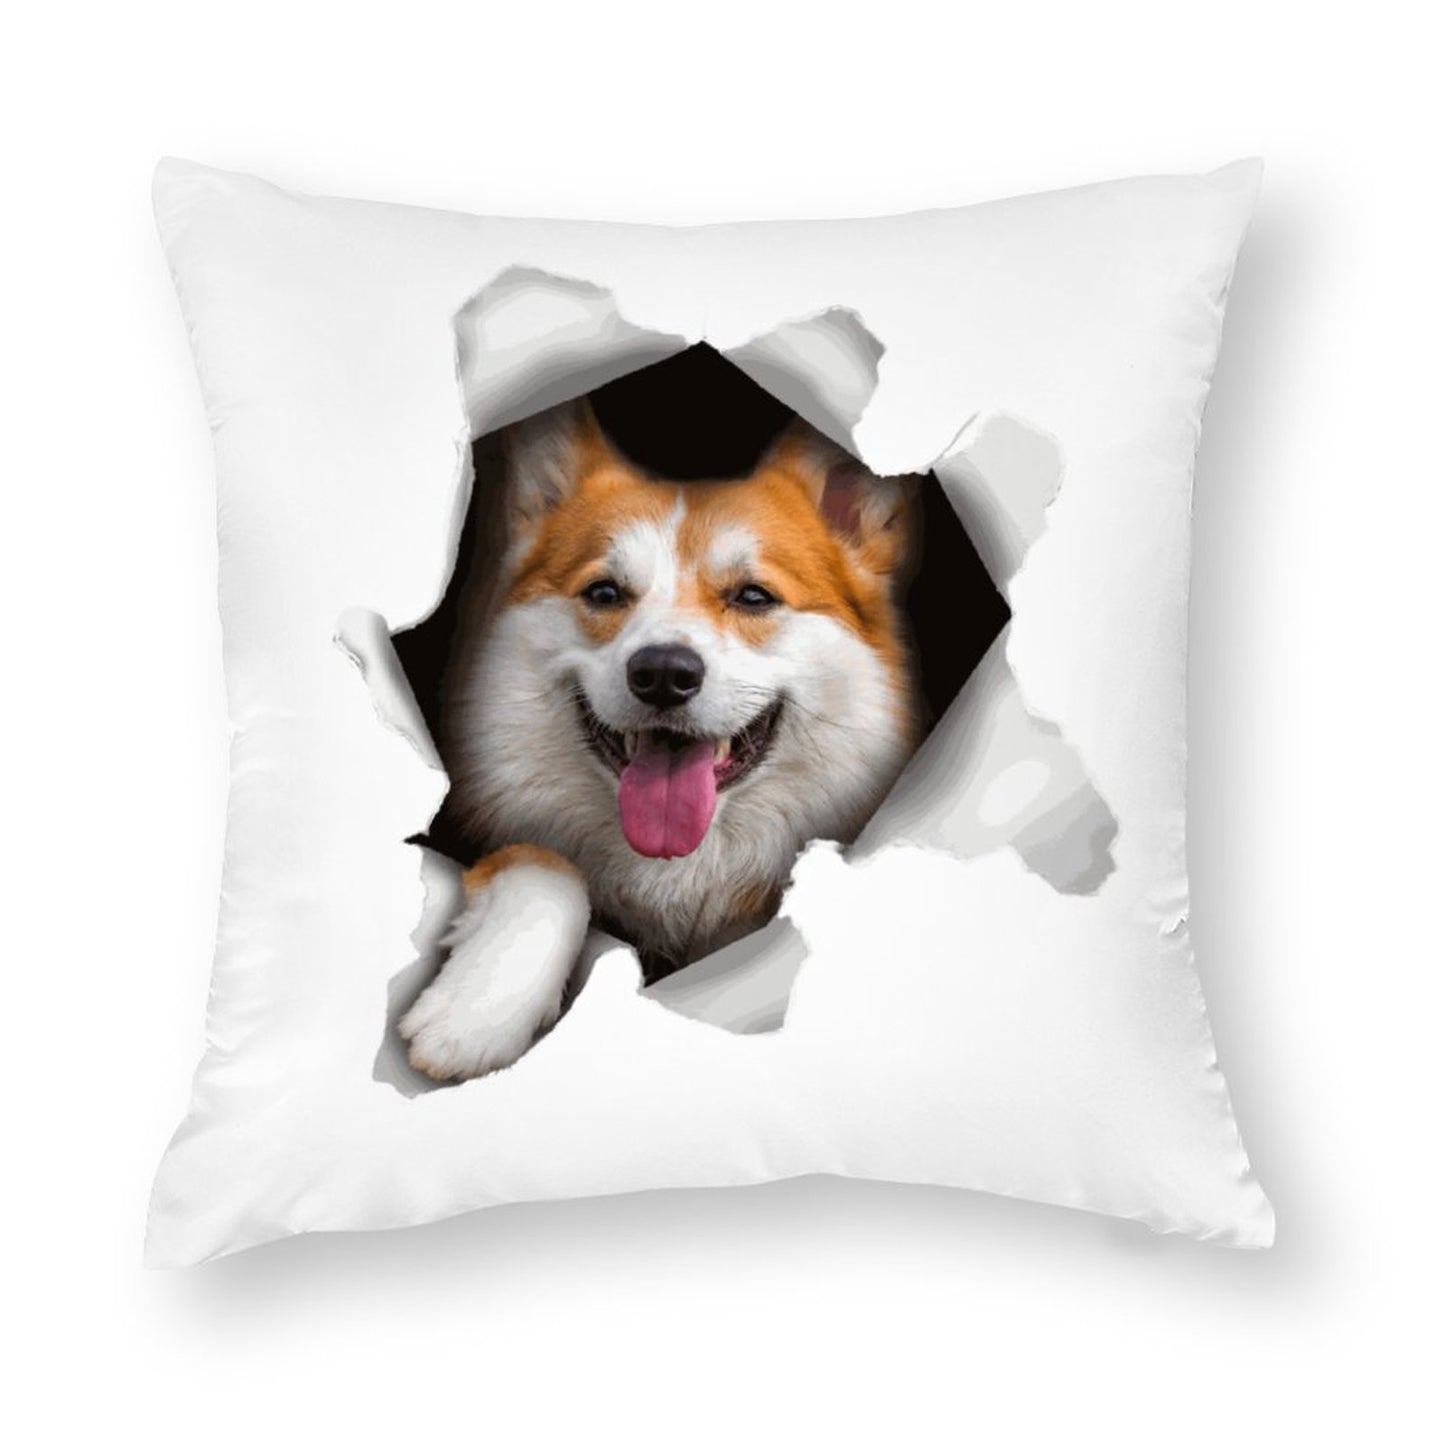 Online Custom Polyester Pillow Case Set of 4 Paper Hole Dog Only Pillowcase